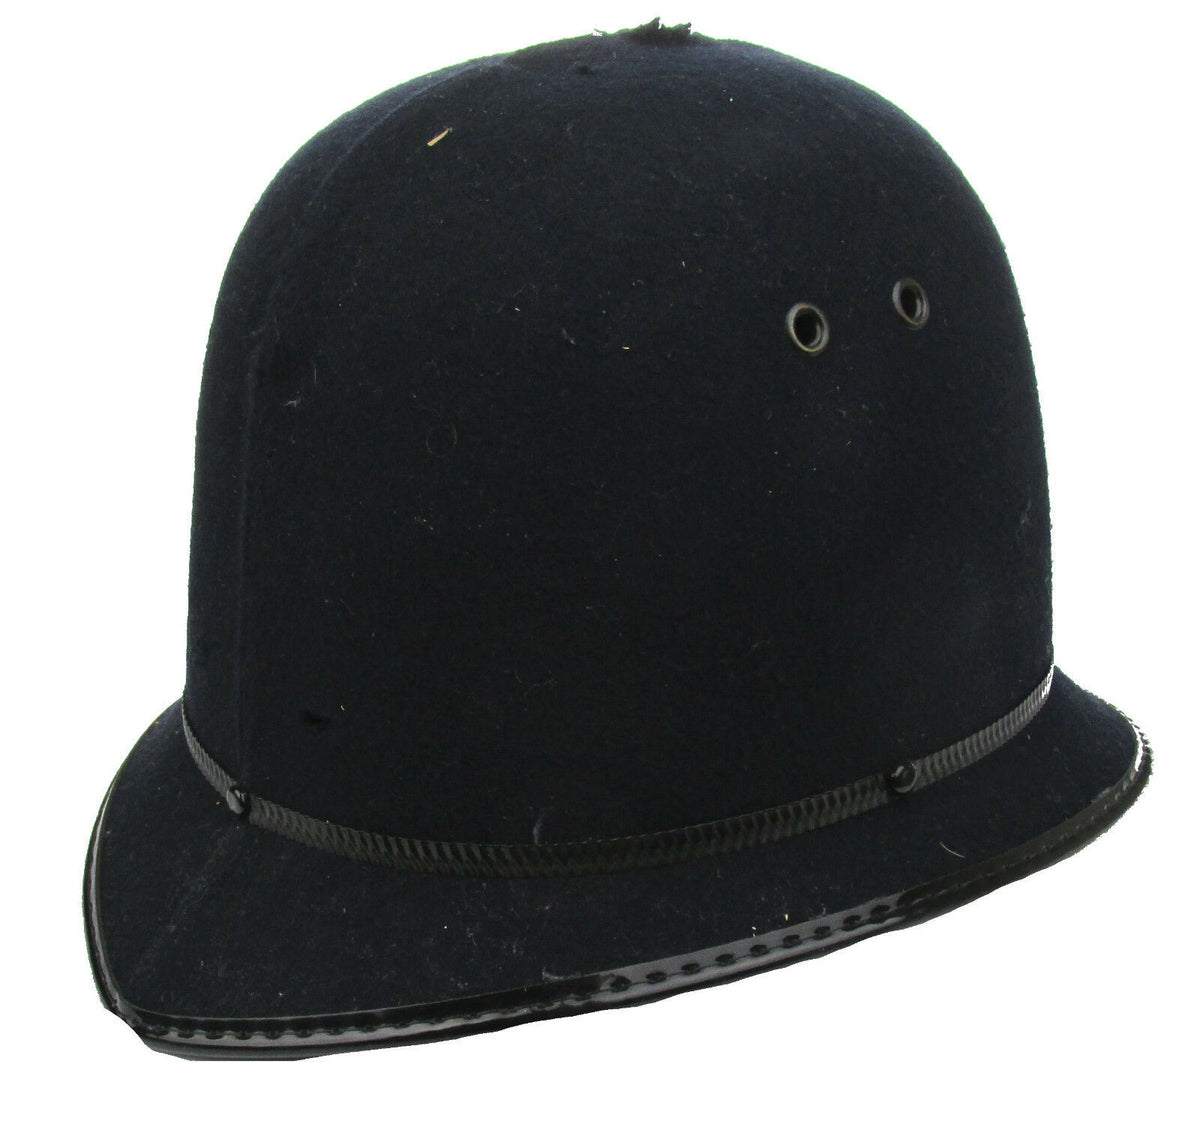 British Bobby Hat without Insignia - Authentic - Amazing Low Price!